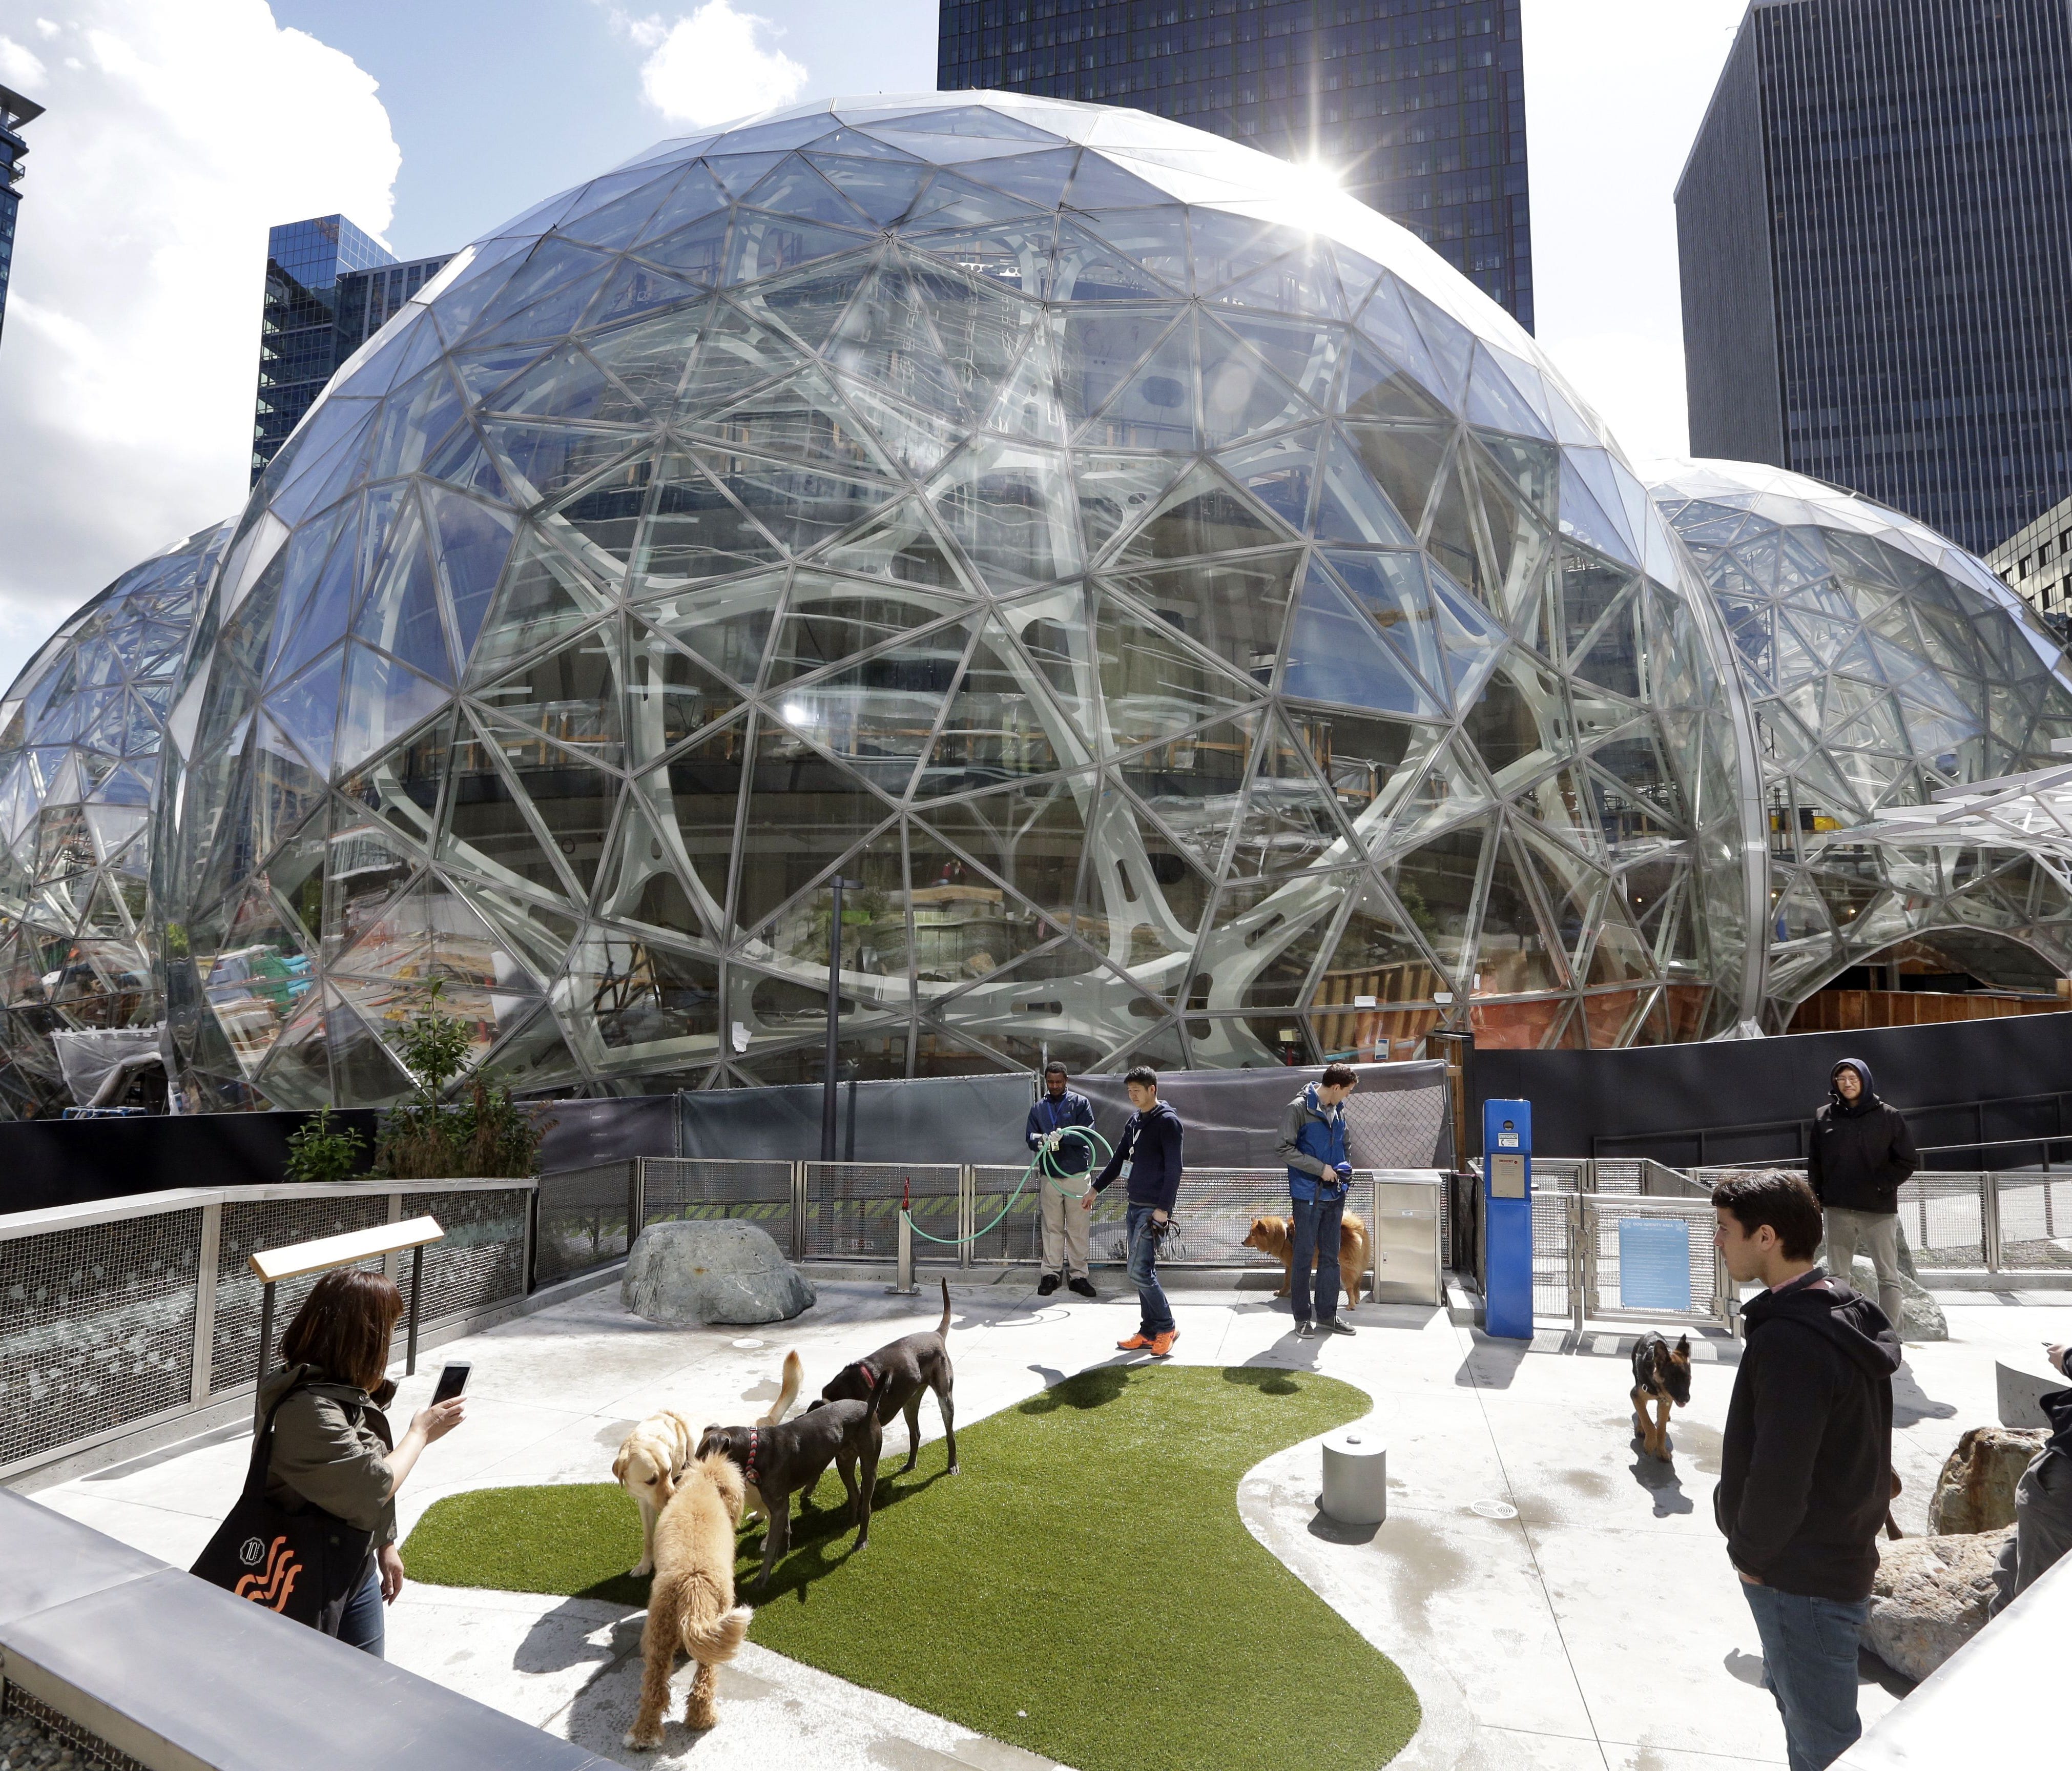 Amazon employees tend to their dogs in a canine play area adjacent to where construction continues on three large, glass-covered domes as part of an expansion of the Amazon.com campus, Thursday, April 27, 2017, in downtown Seattle.